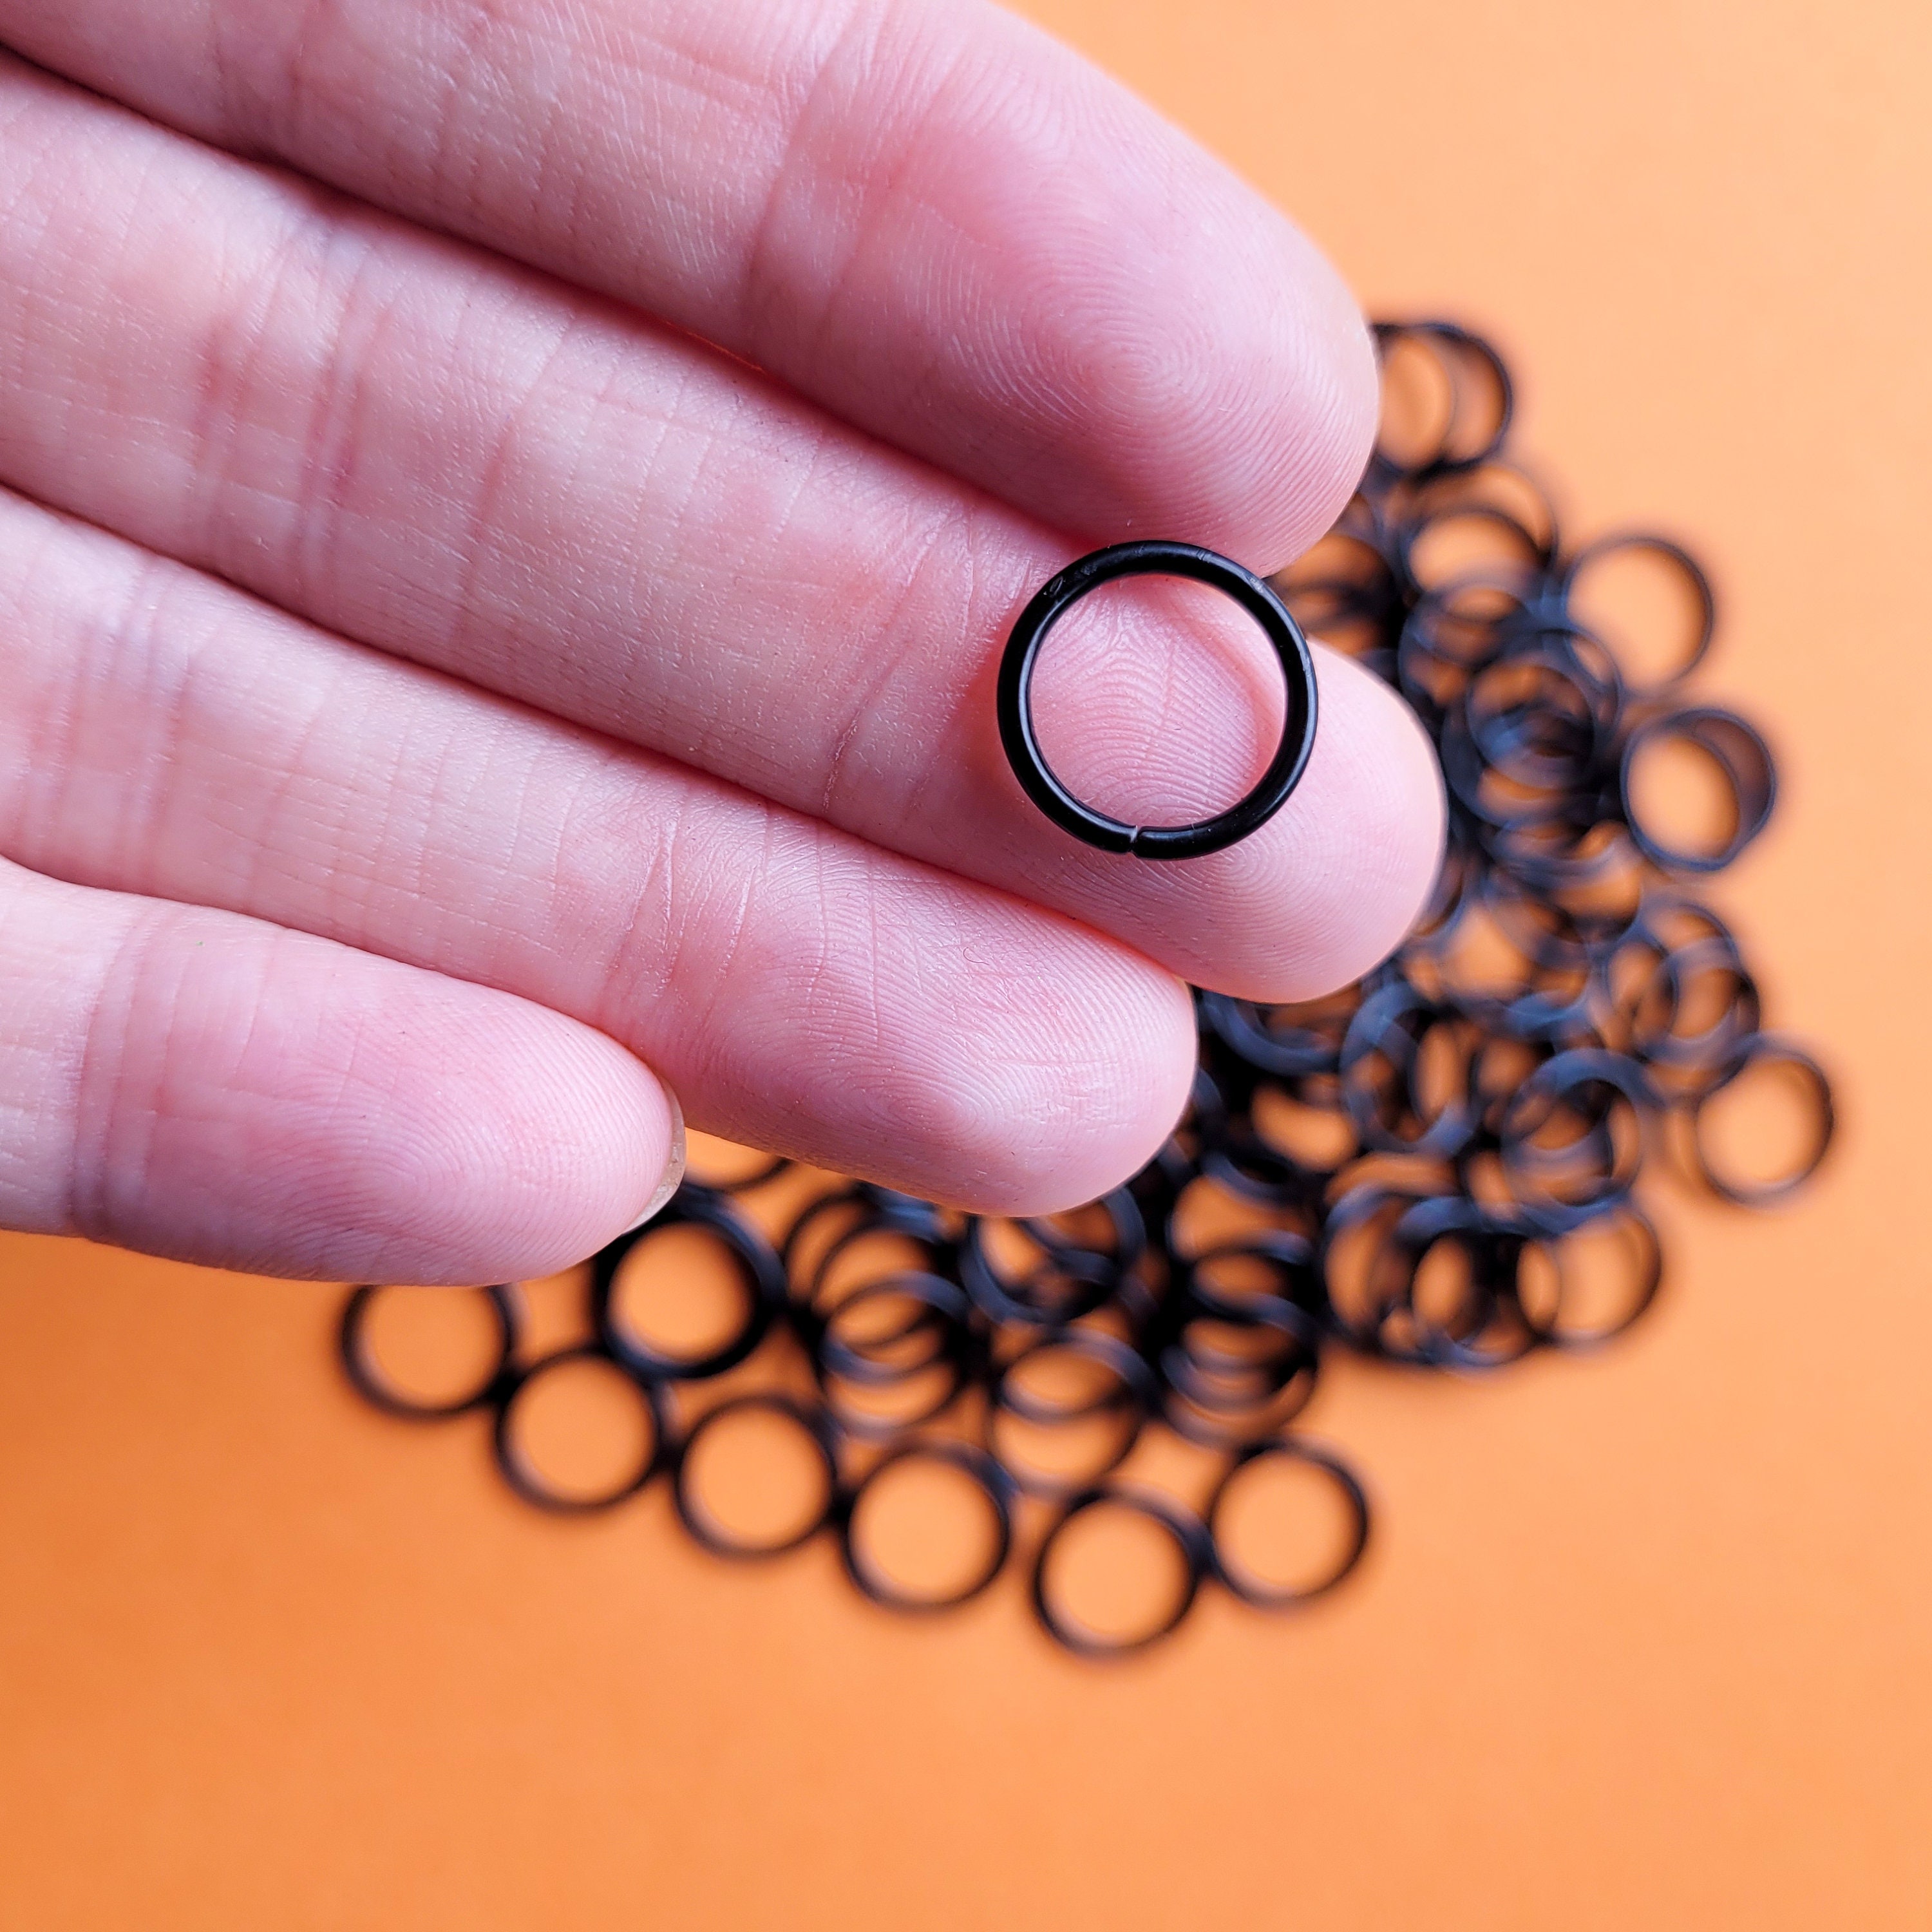 12mm BLACK Open Jump Rings (Nickel Free), 100 Pieces • 2wards Polymer Clay